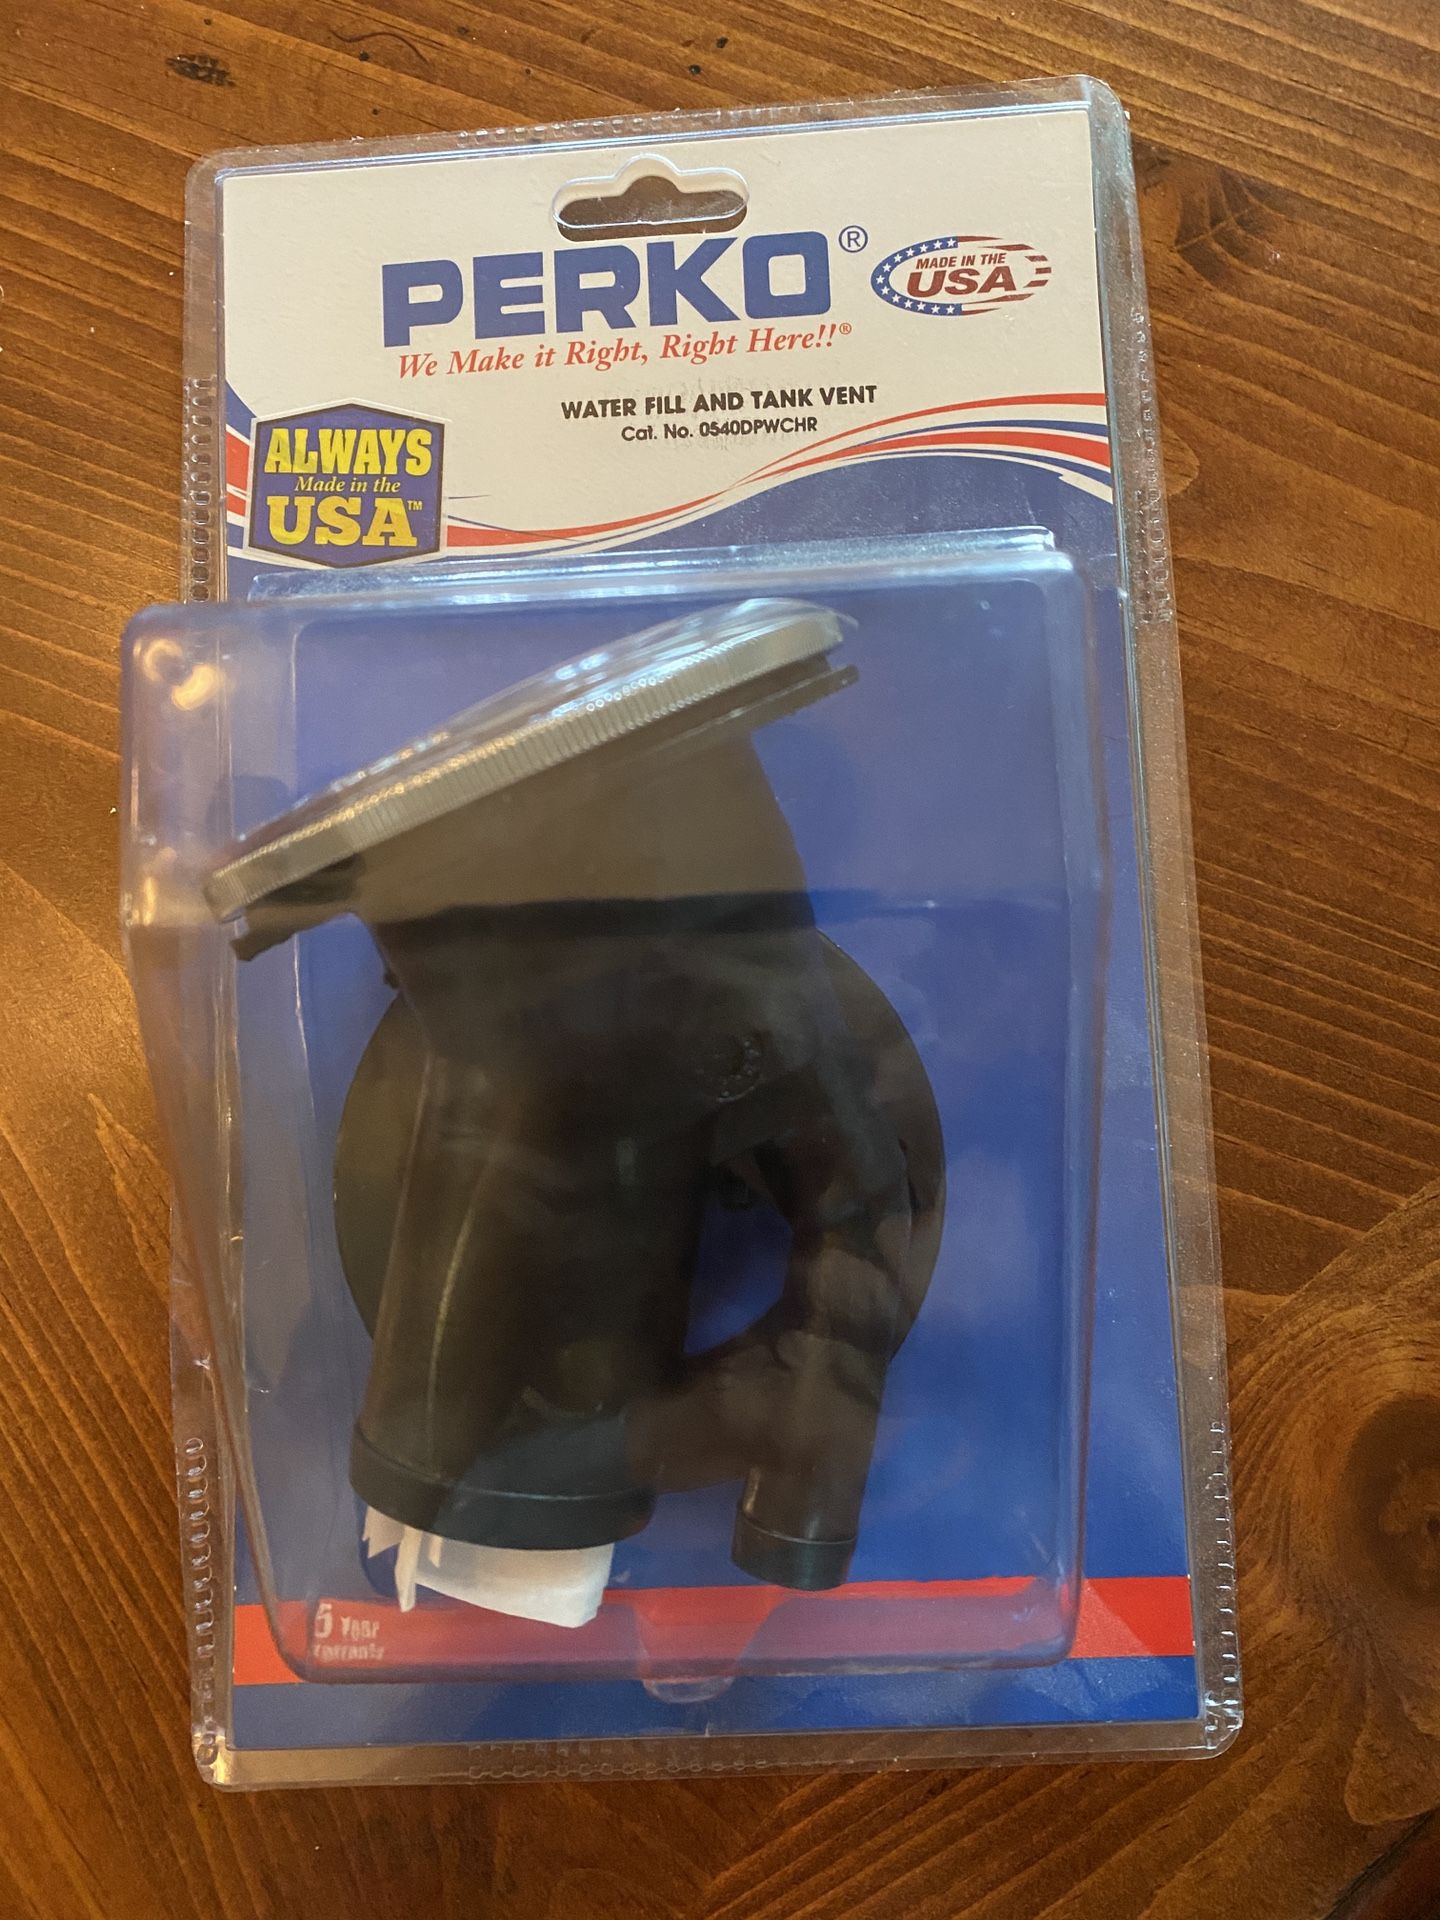 PERKO WATER FILL AND TANK VENT